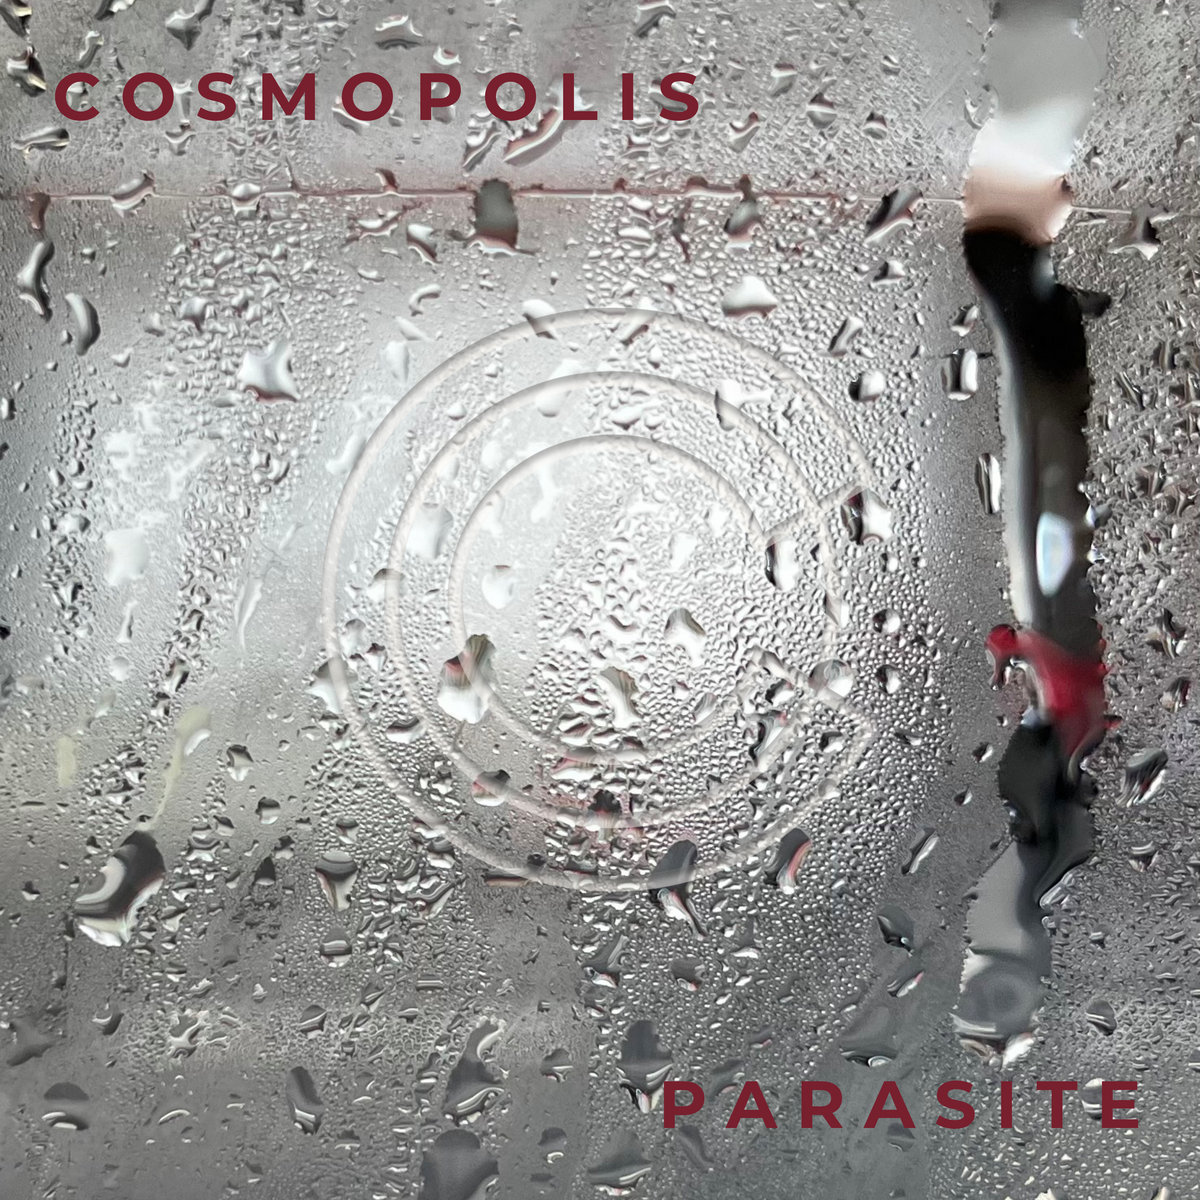 Artwork for the single “Parasite” by Cosmopolis